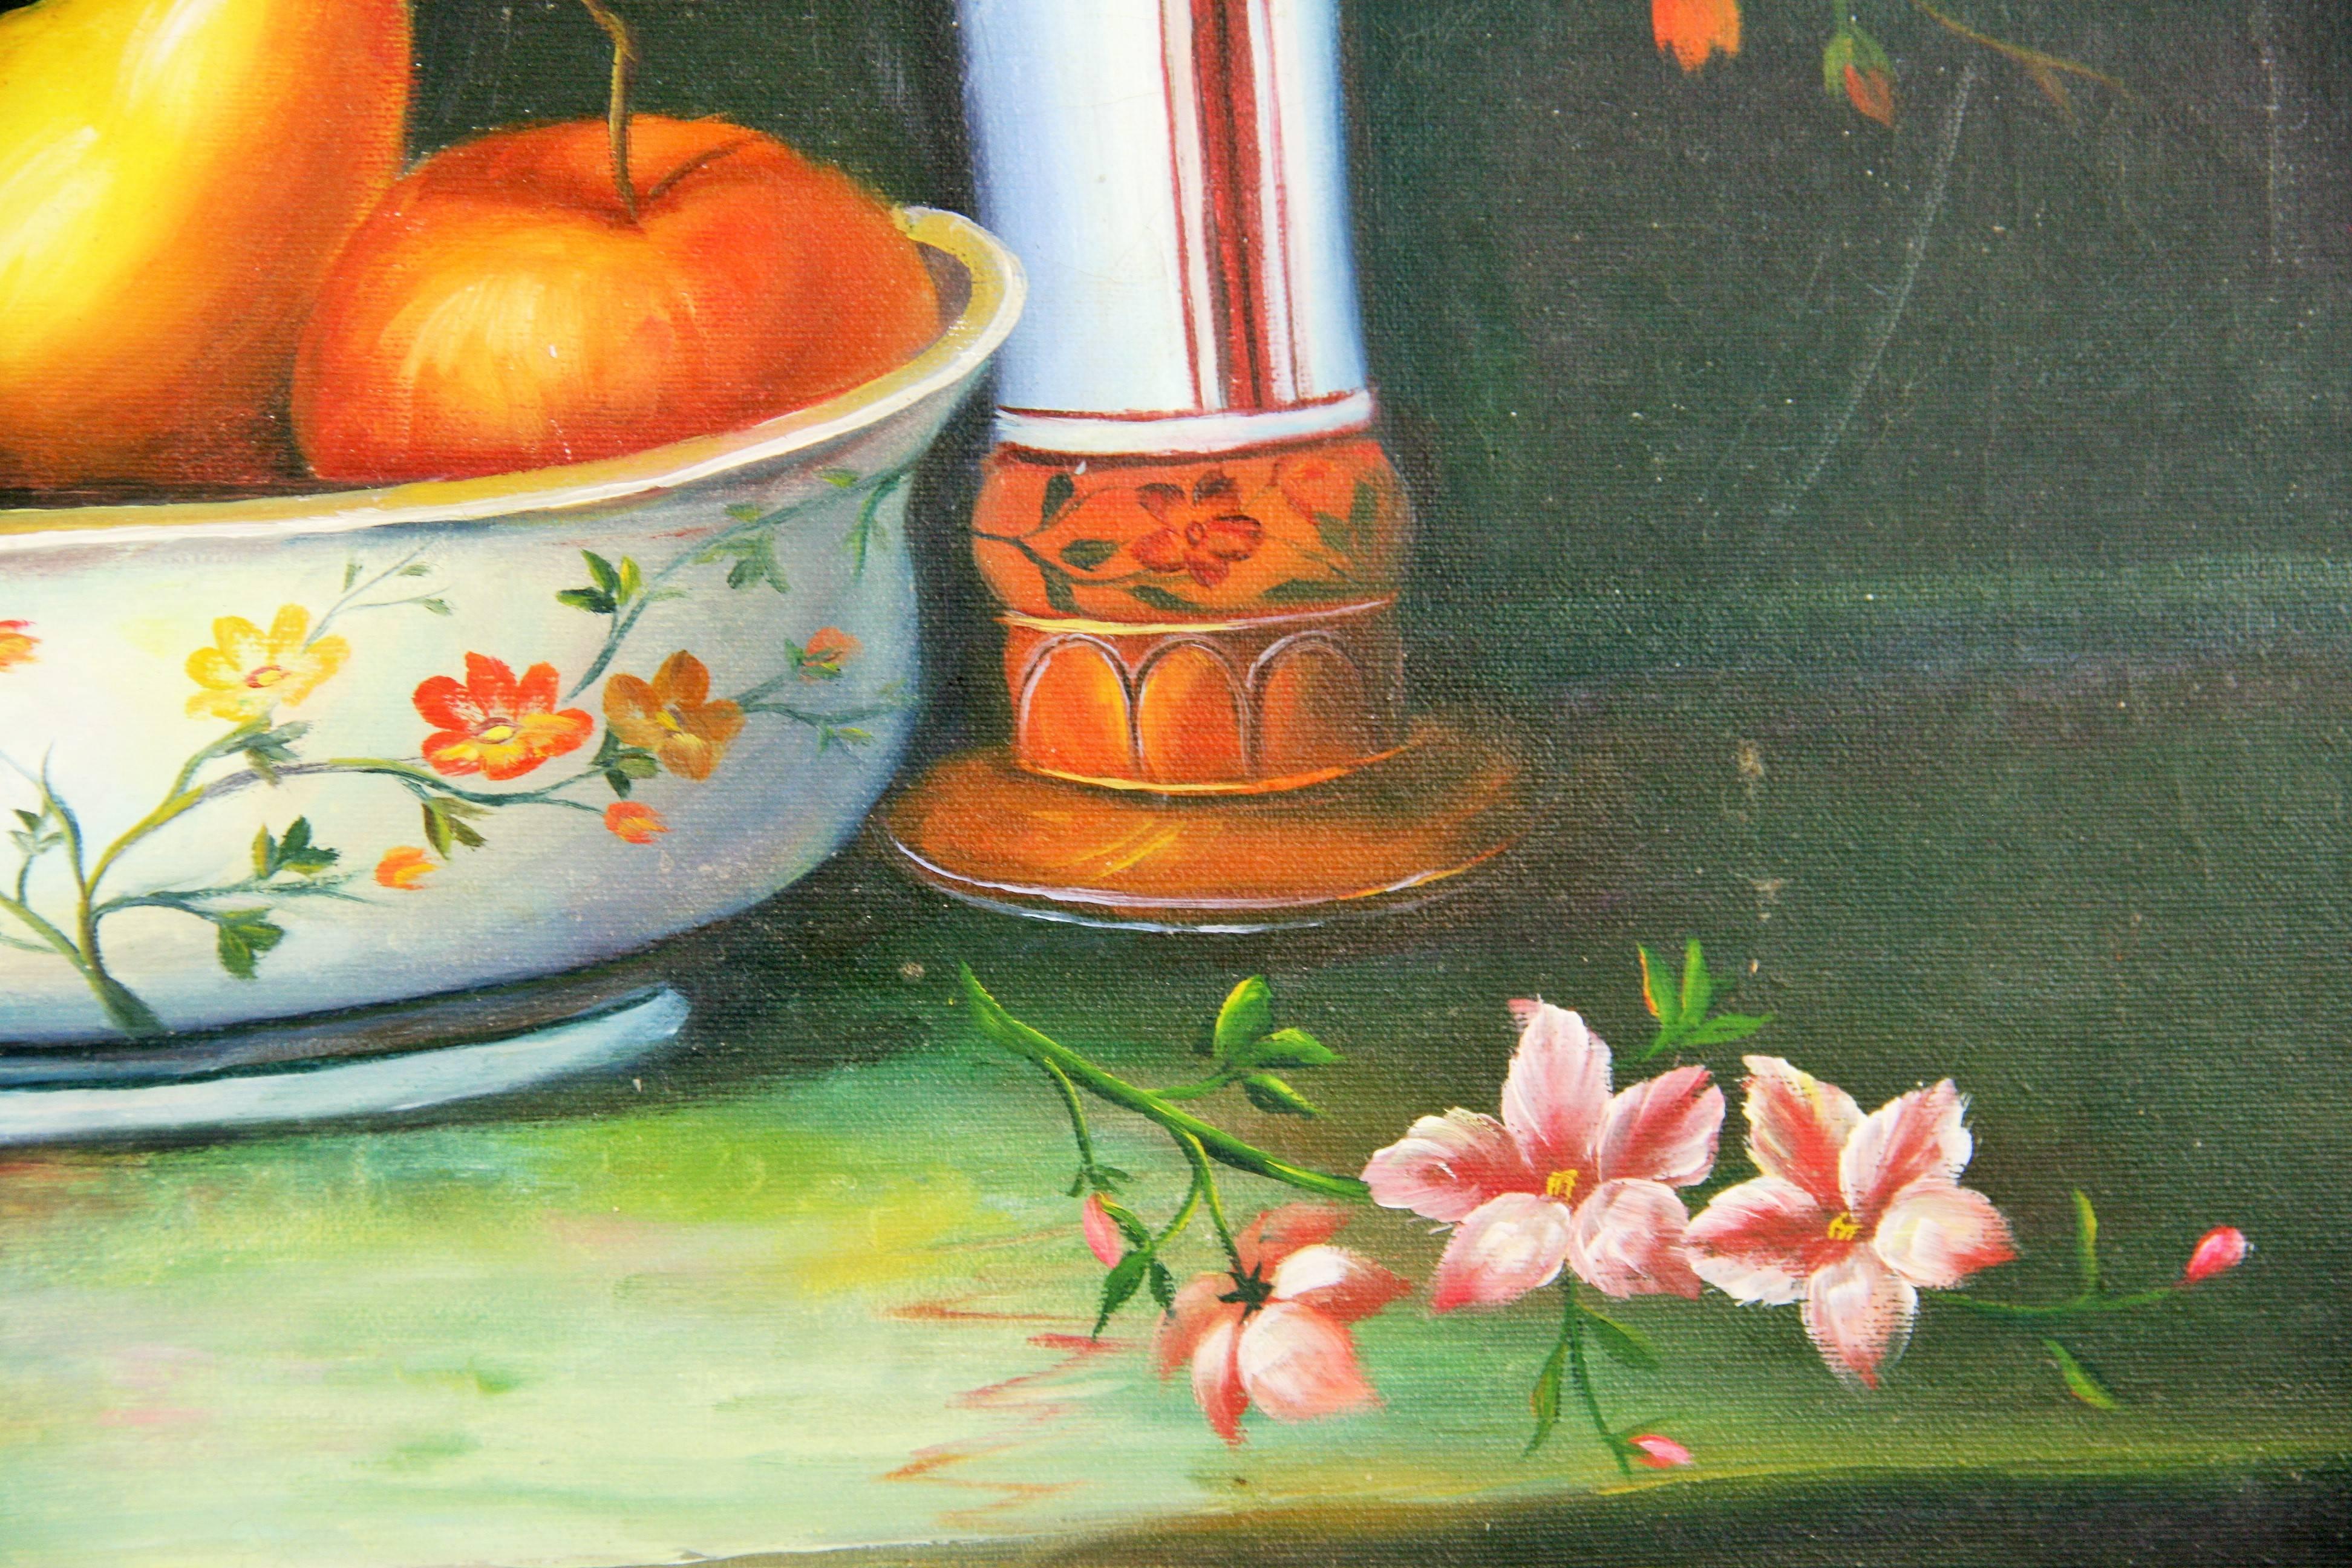 painting of fruit or flowers life